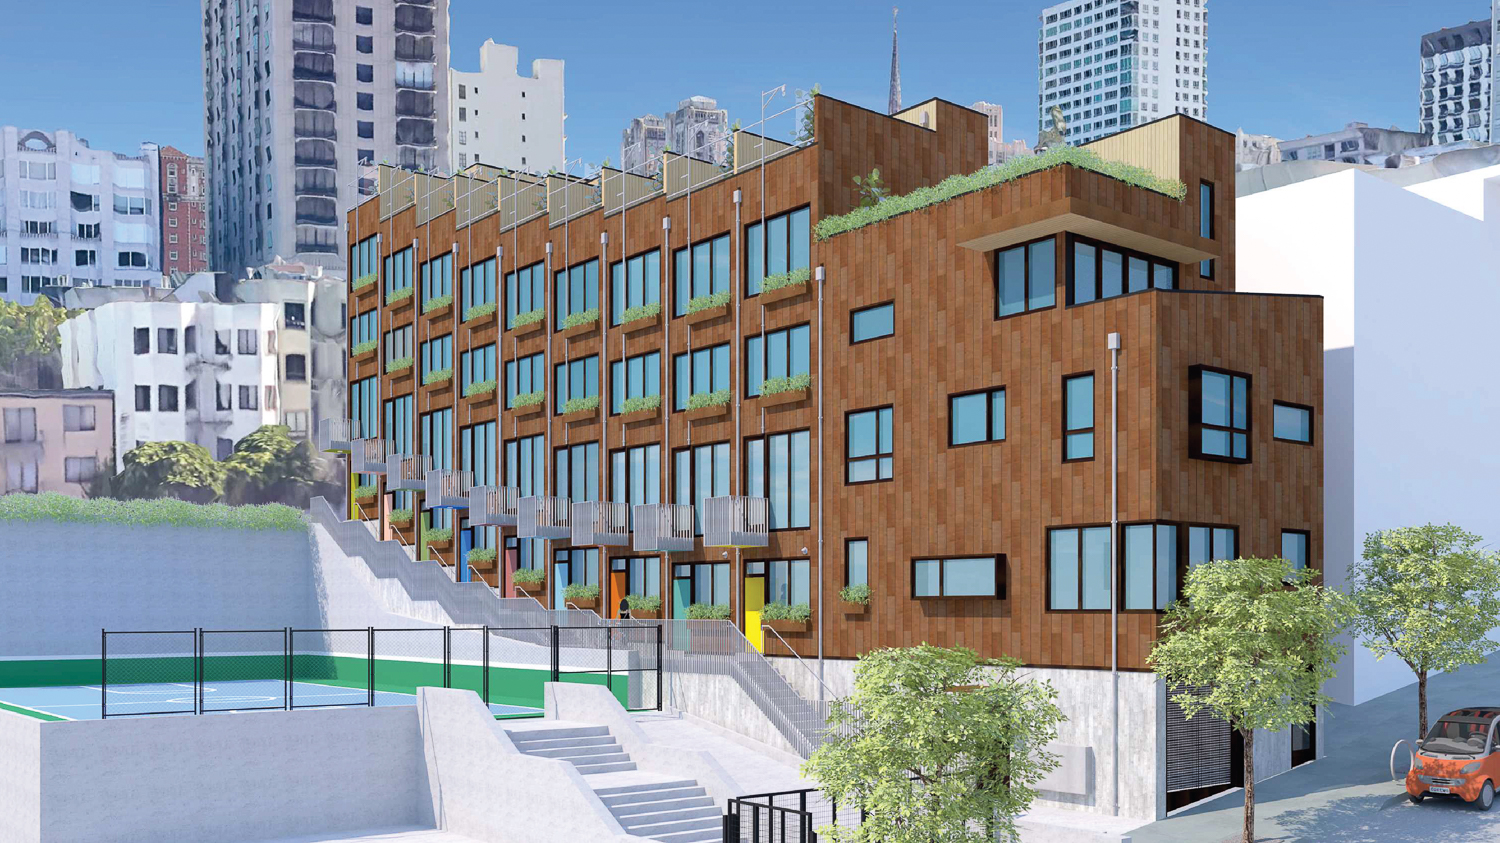 1151 Washington Street view from across the street, rendering by Macy Architecture